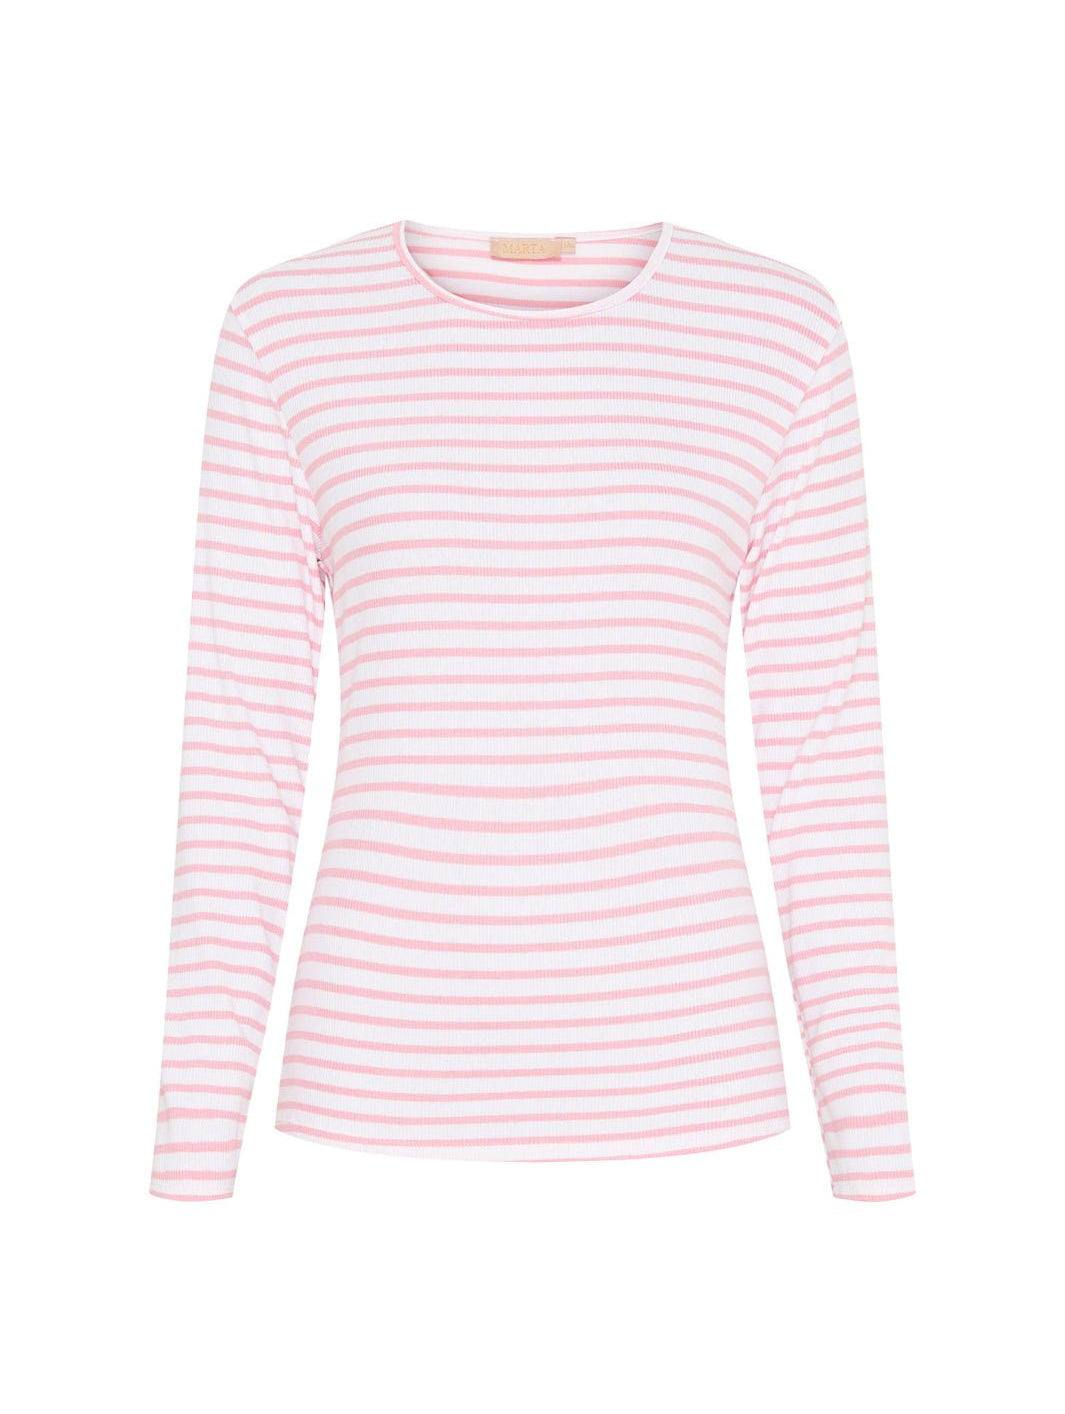 Marta du Chateau Long sleeved tee confetto/white - Online-Mode